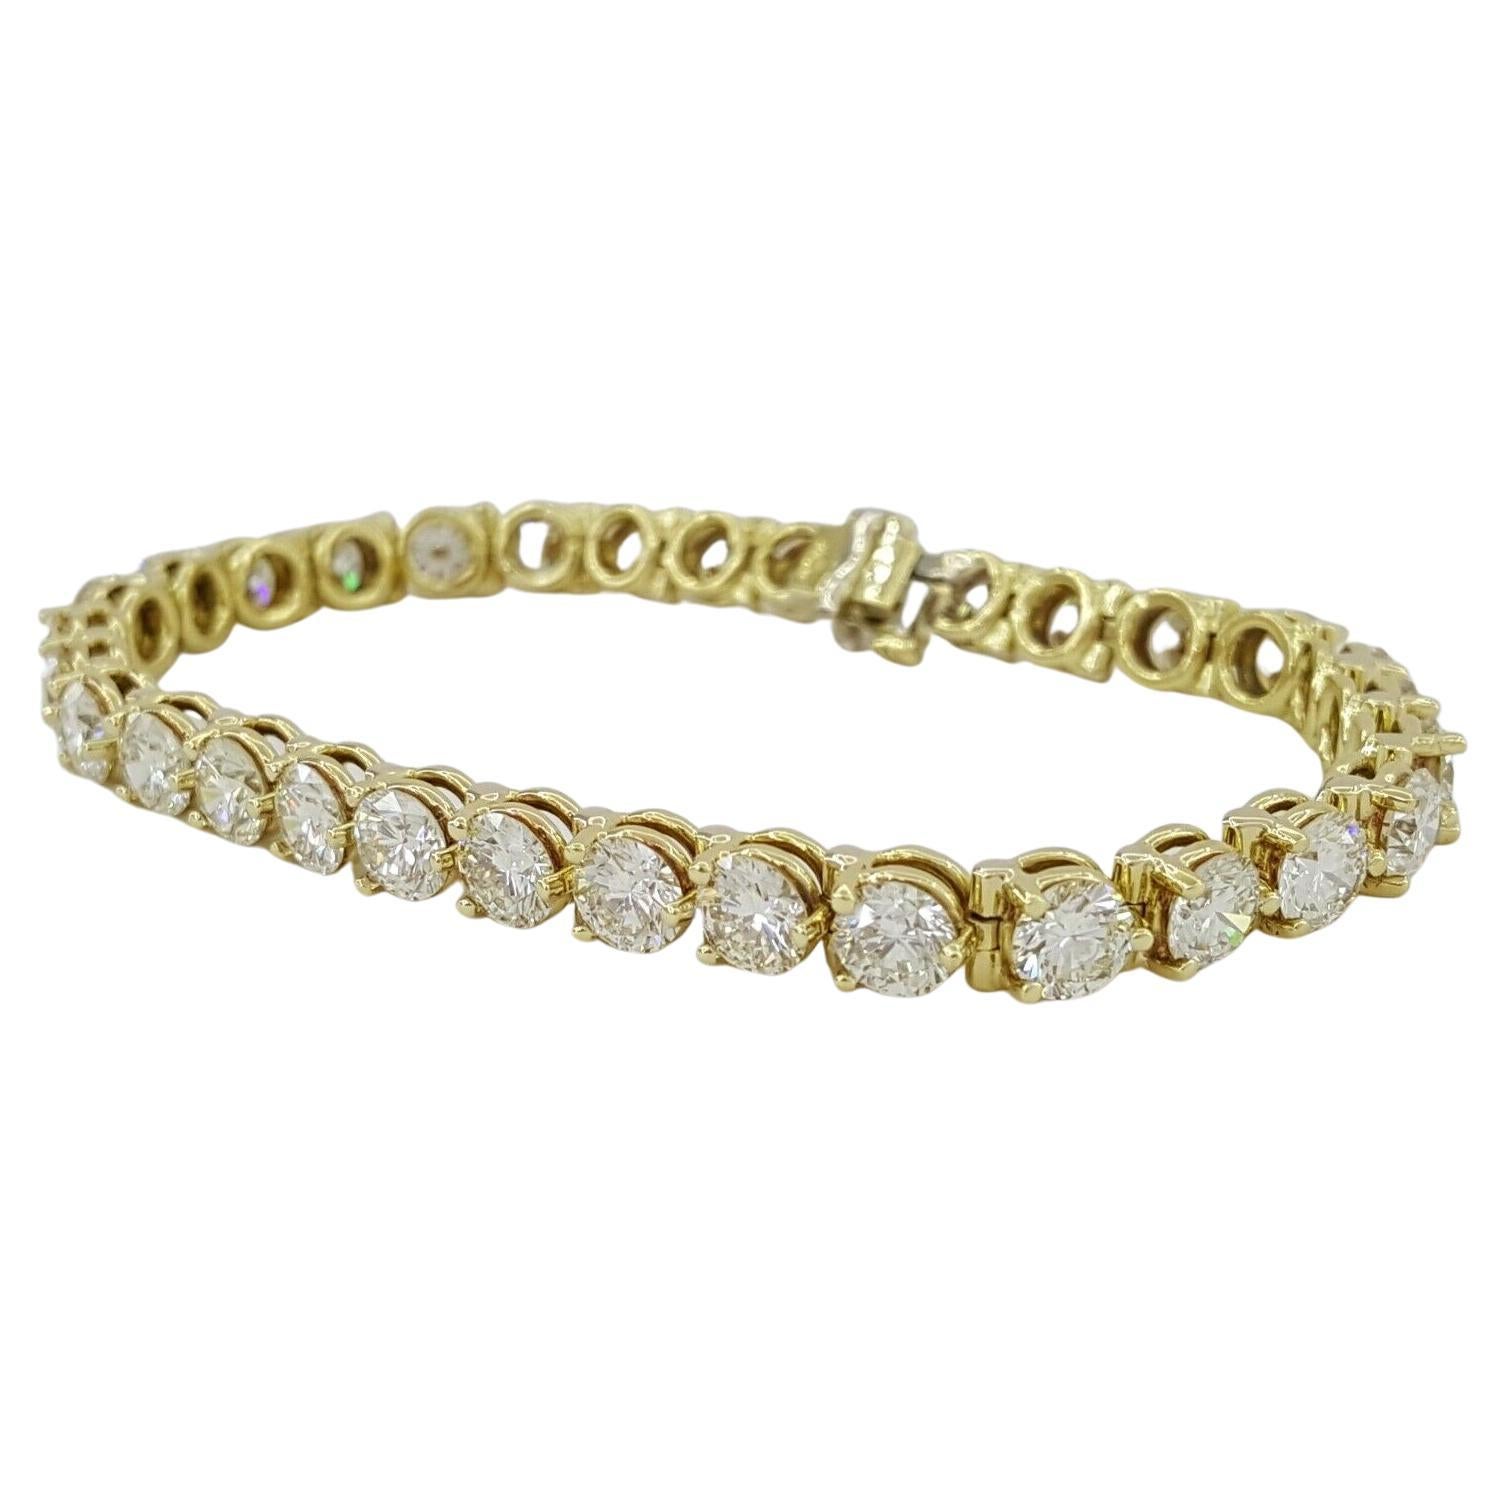 13.18ct Total Weight Round Brilliant Cut Diamond 18k Yellow Gold Tennis Bracele For Sale